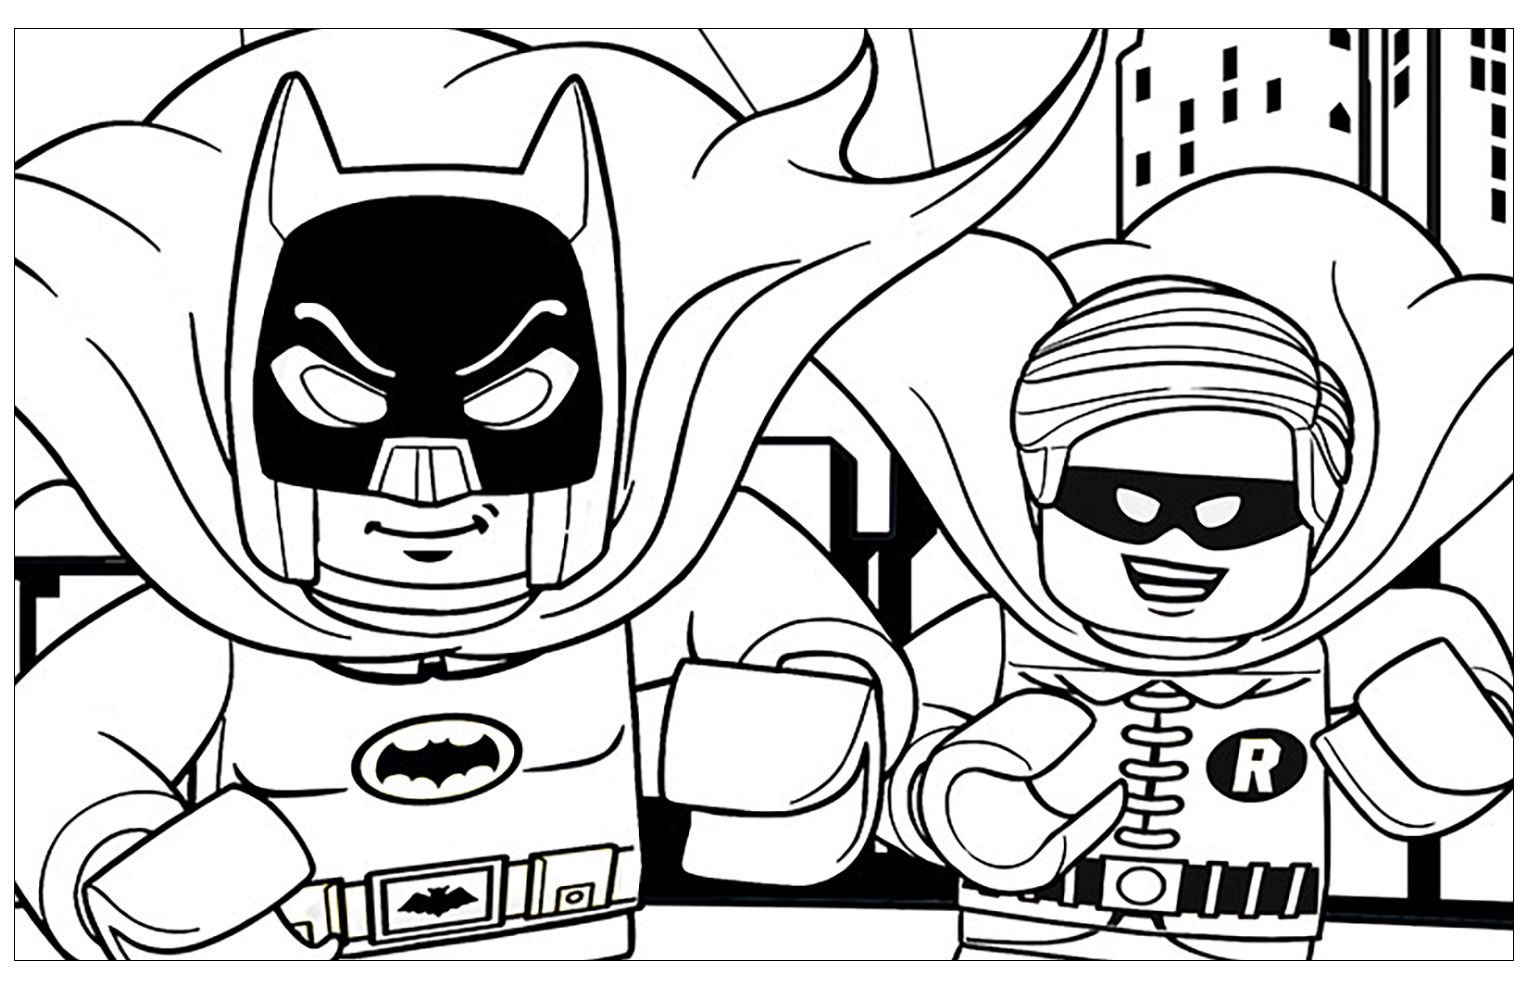 Image of Lego Batman to print and color - Lego Batman Kids Coloring Pages